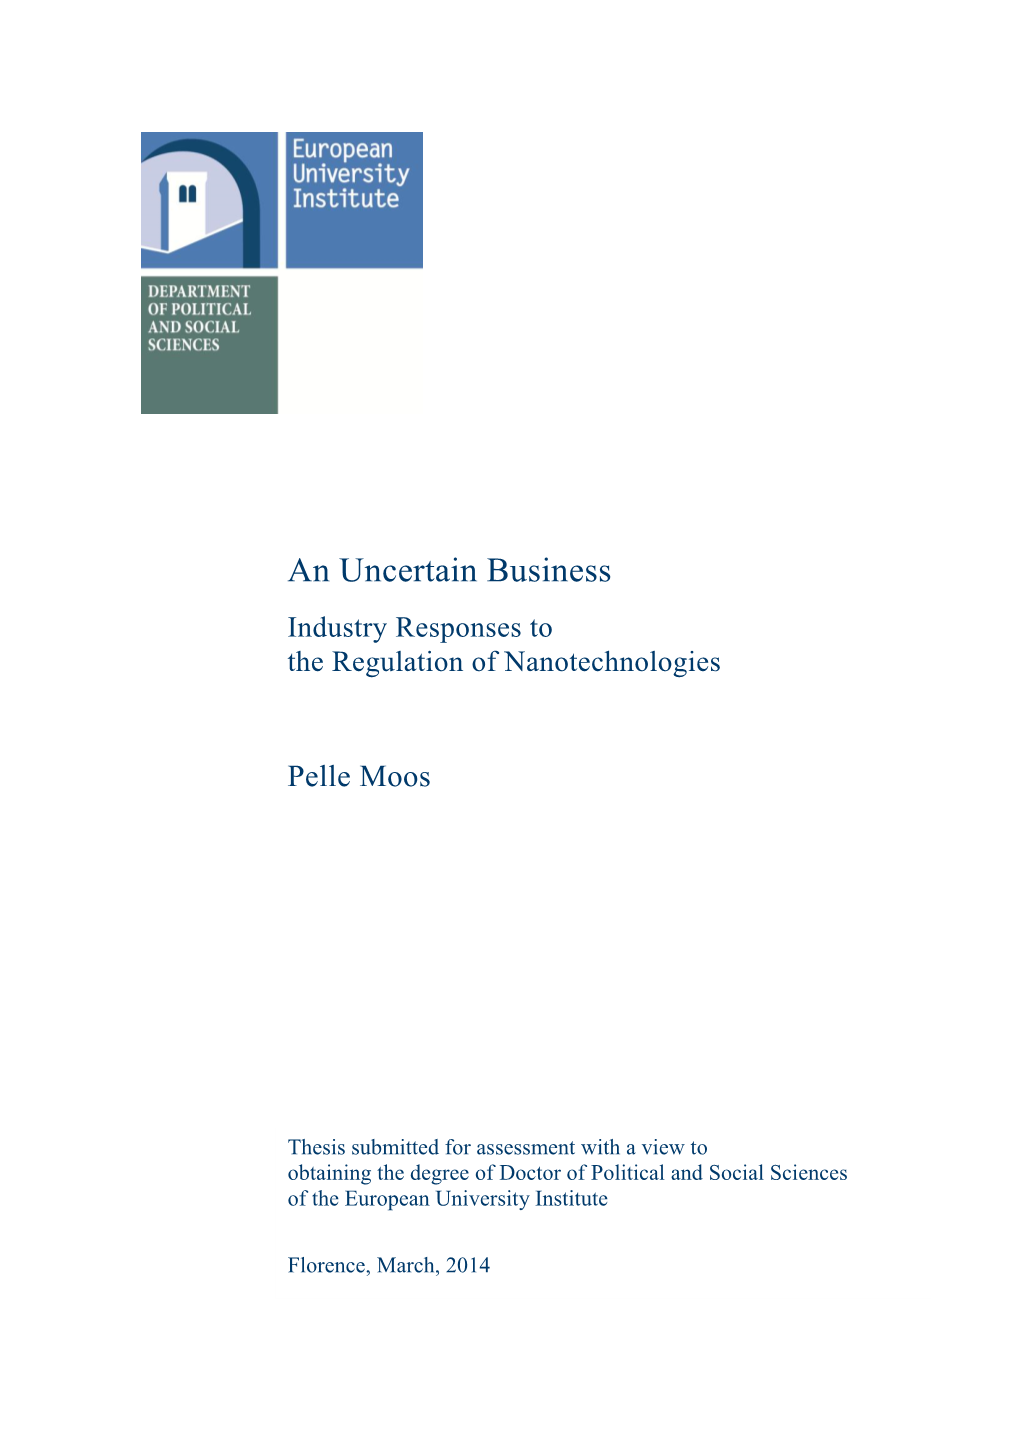 An Uncertain Business Industry Responses to the Regulation of Nanotechnologies